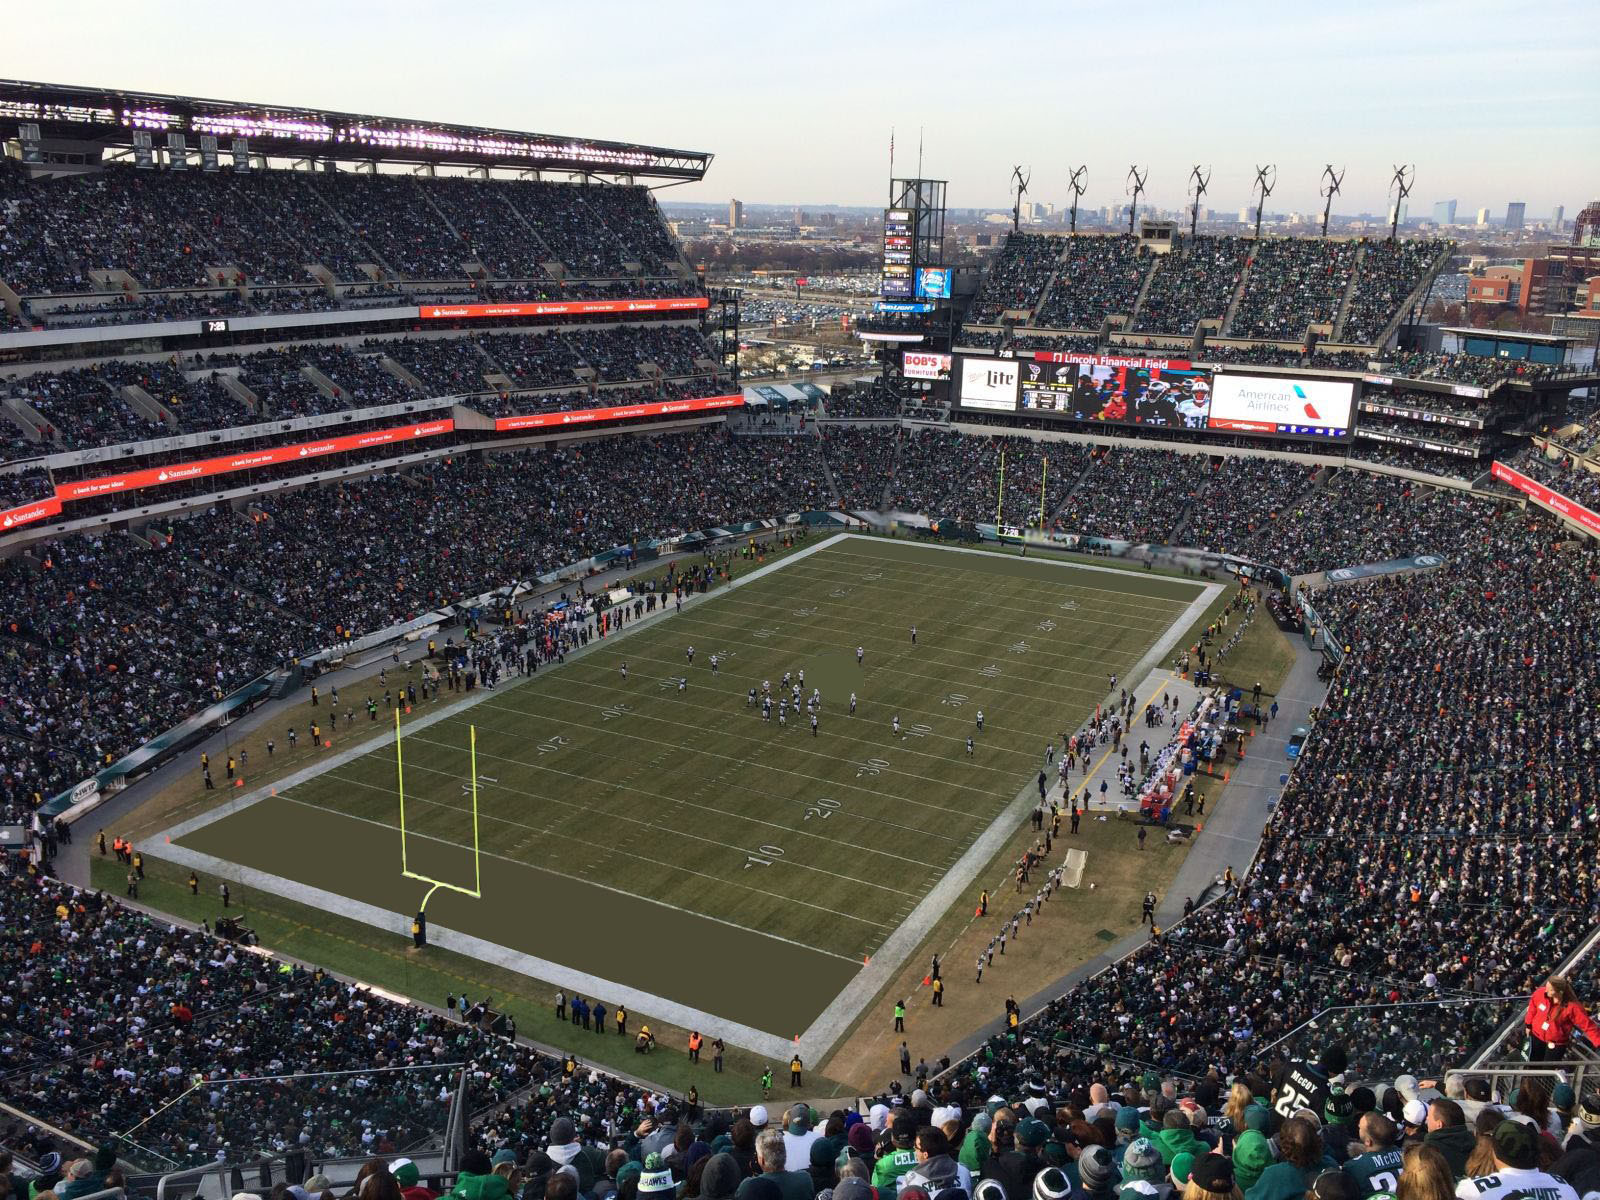 section 217, row 21 seat view  for football - lincoln financial field